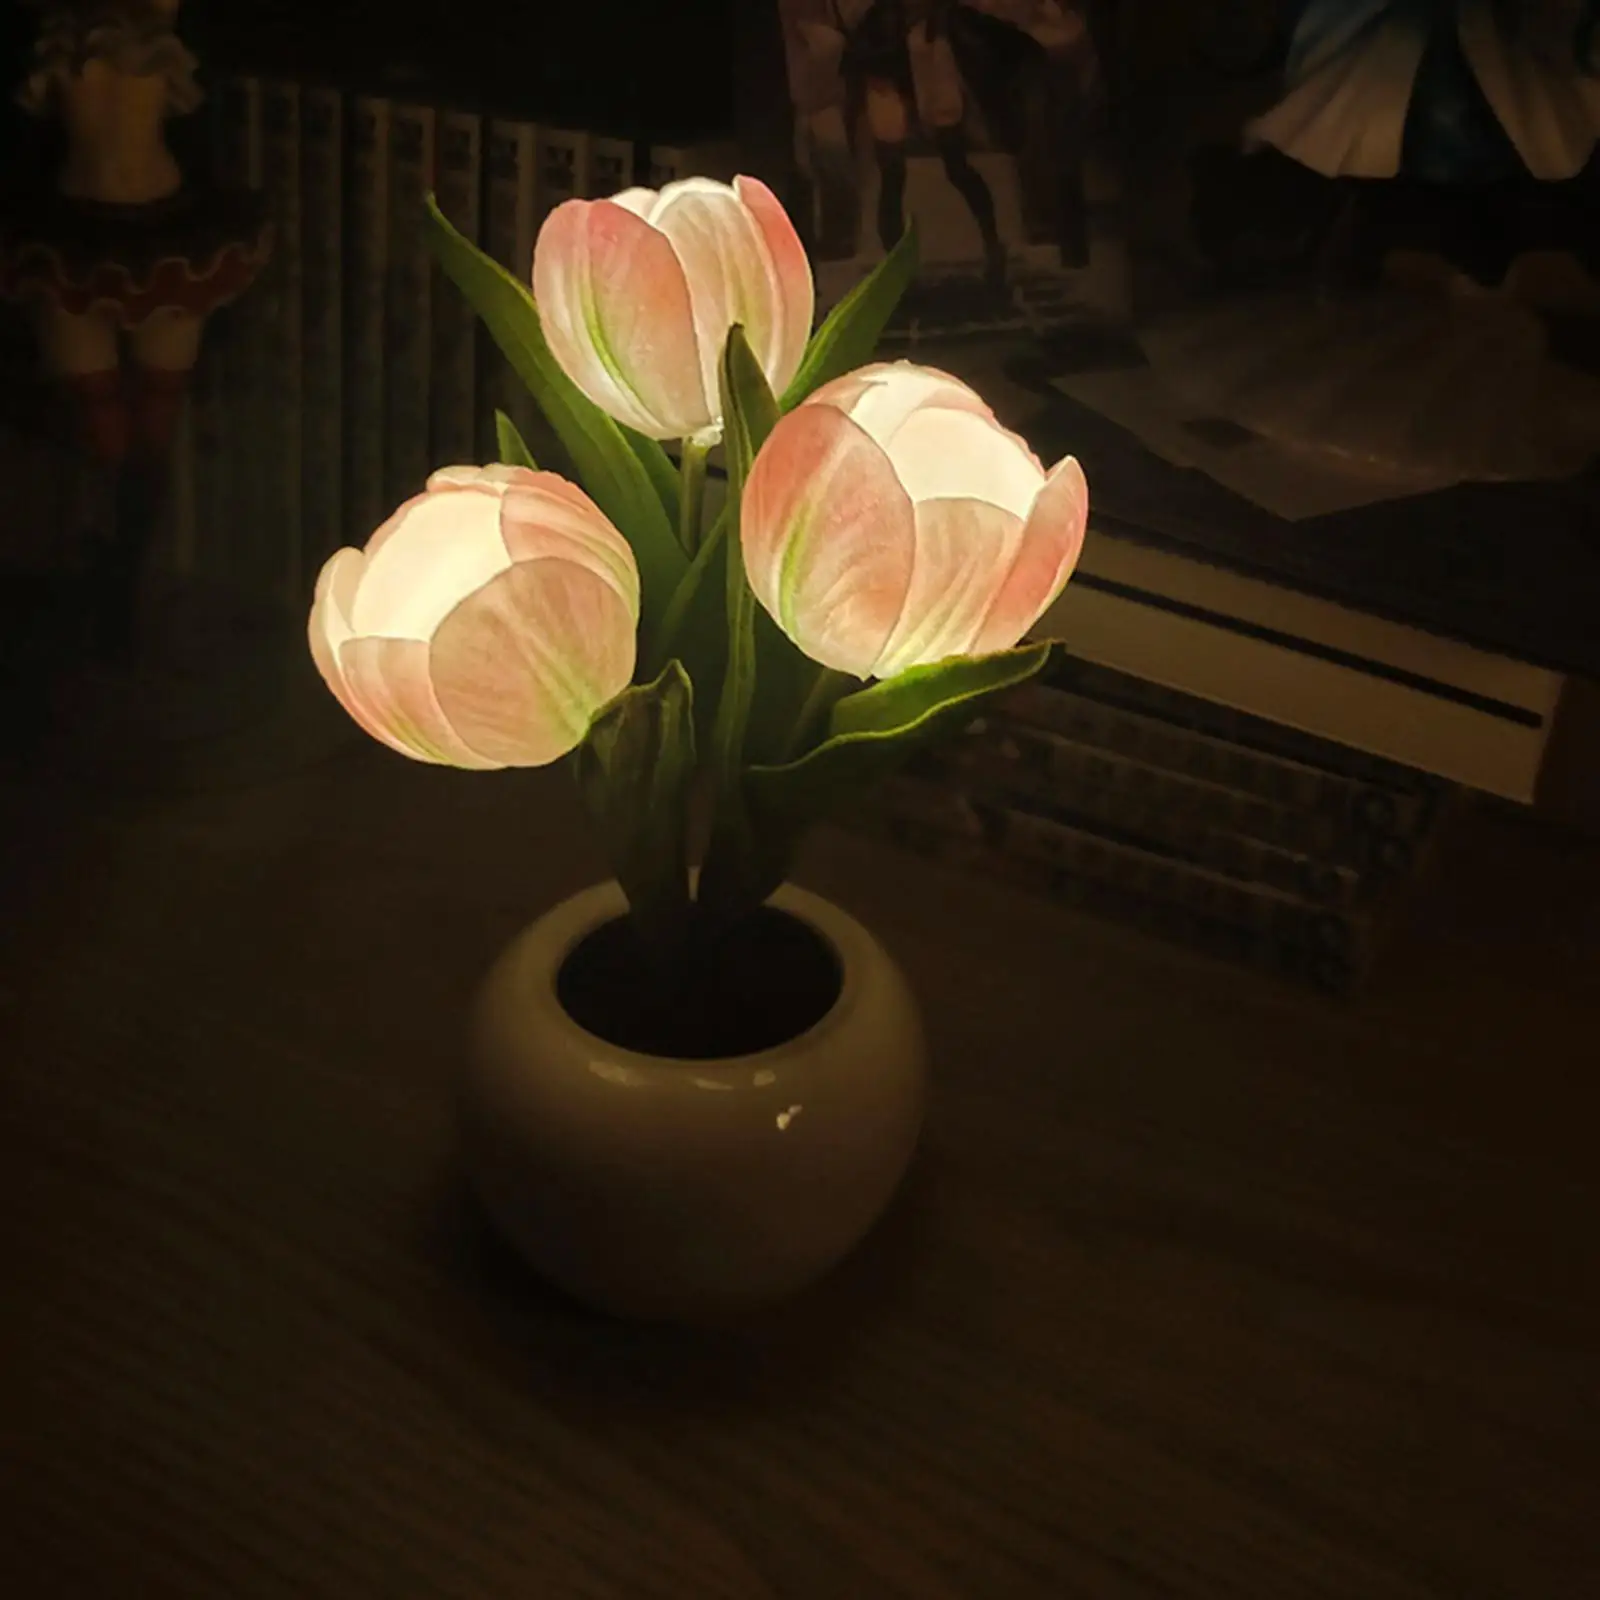 Night Light Artificial Flowers Gifts Flower Lamp Pot Stake Lights for Decorative Pathway Bedroom Yard Table Centerpieces